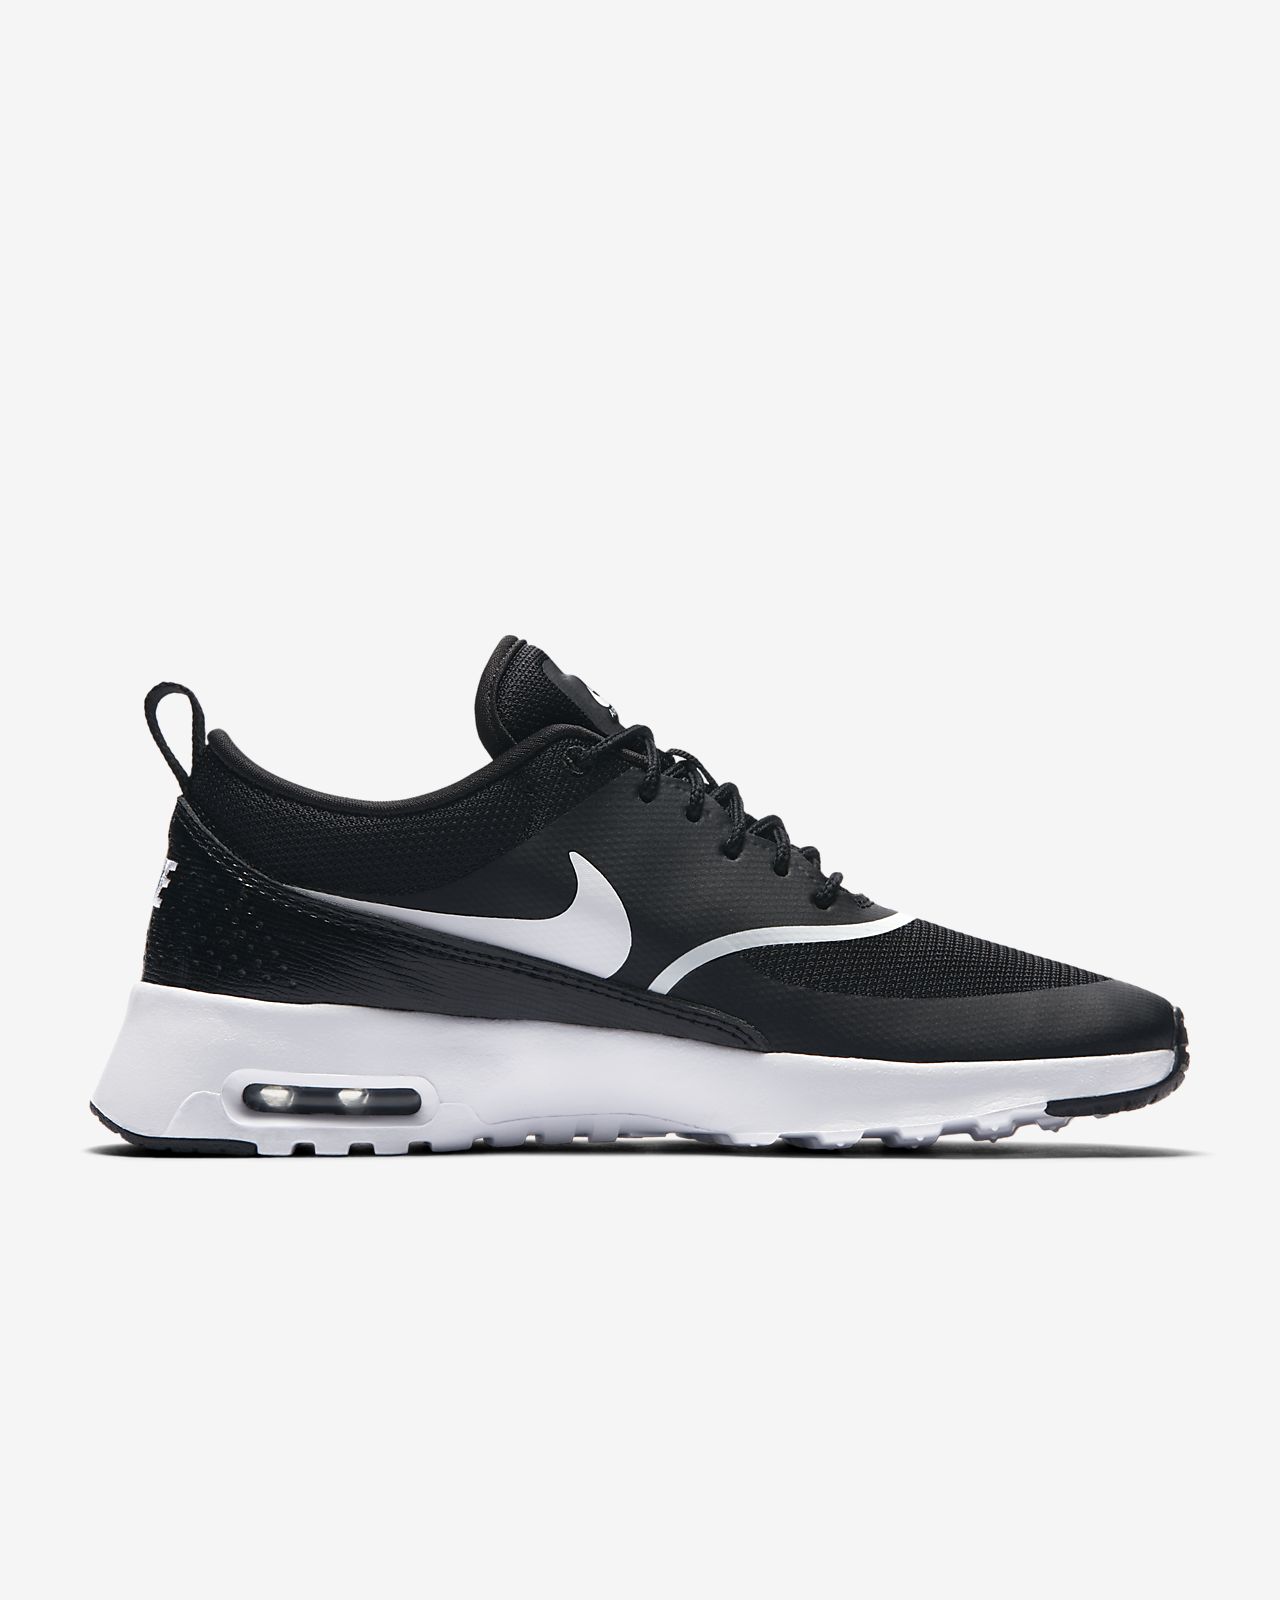 nike shoes air max thea pictures in the box